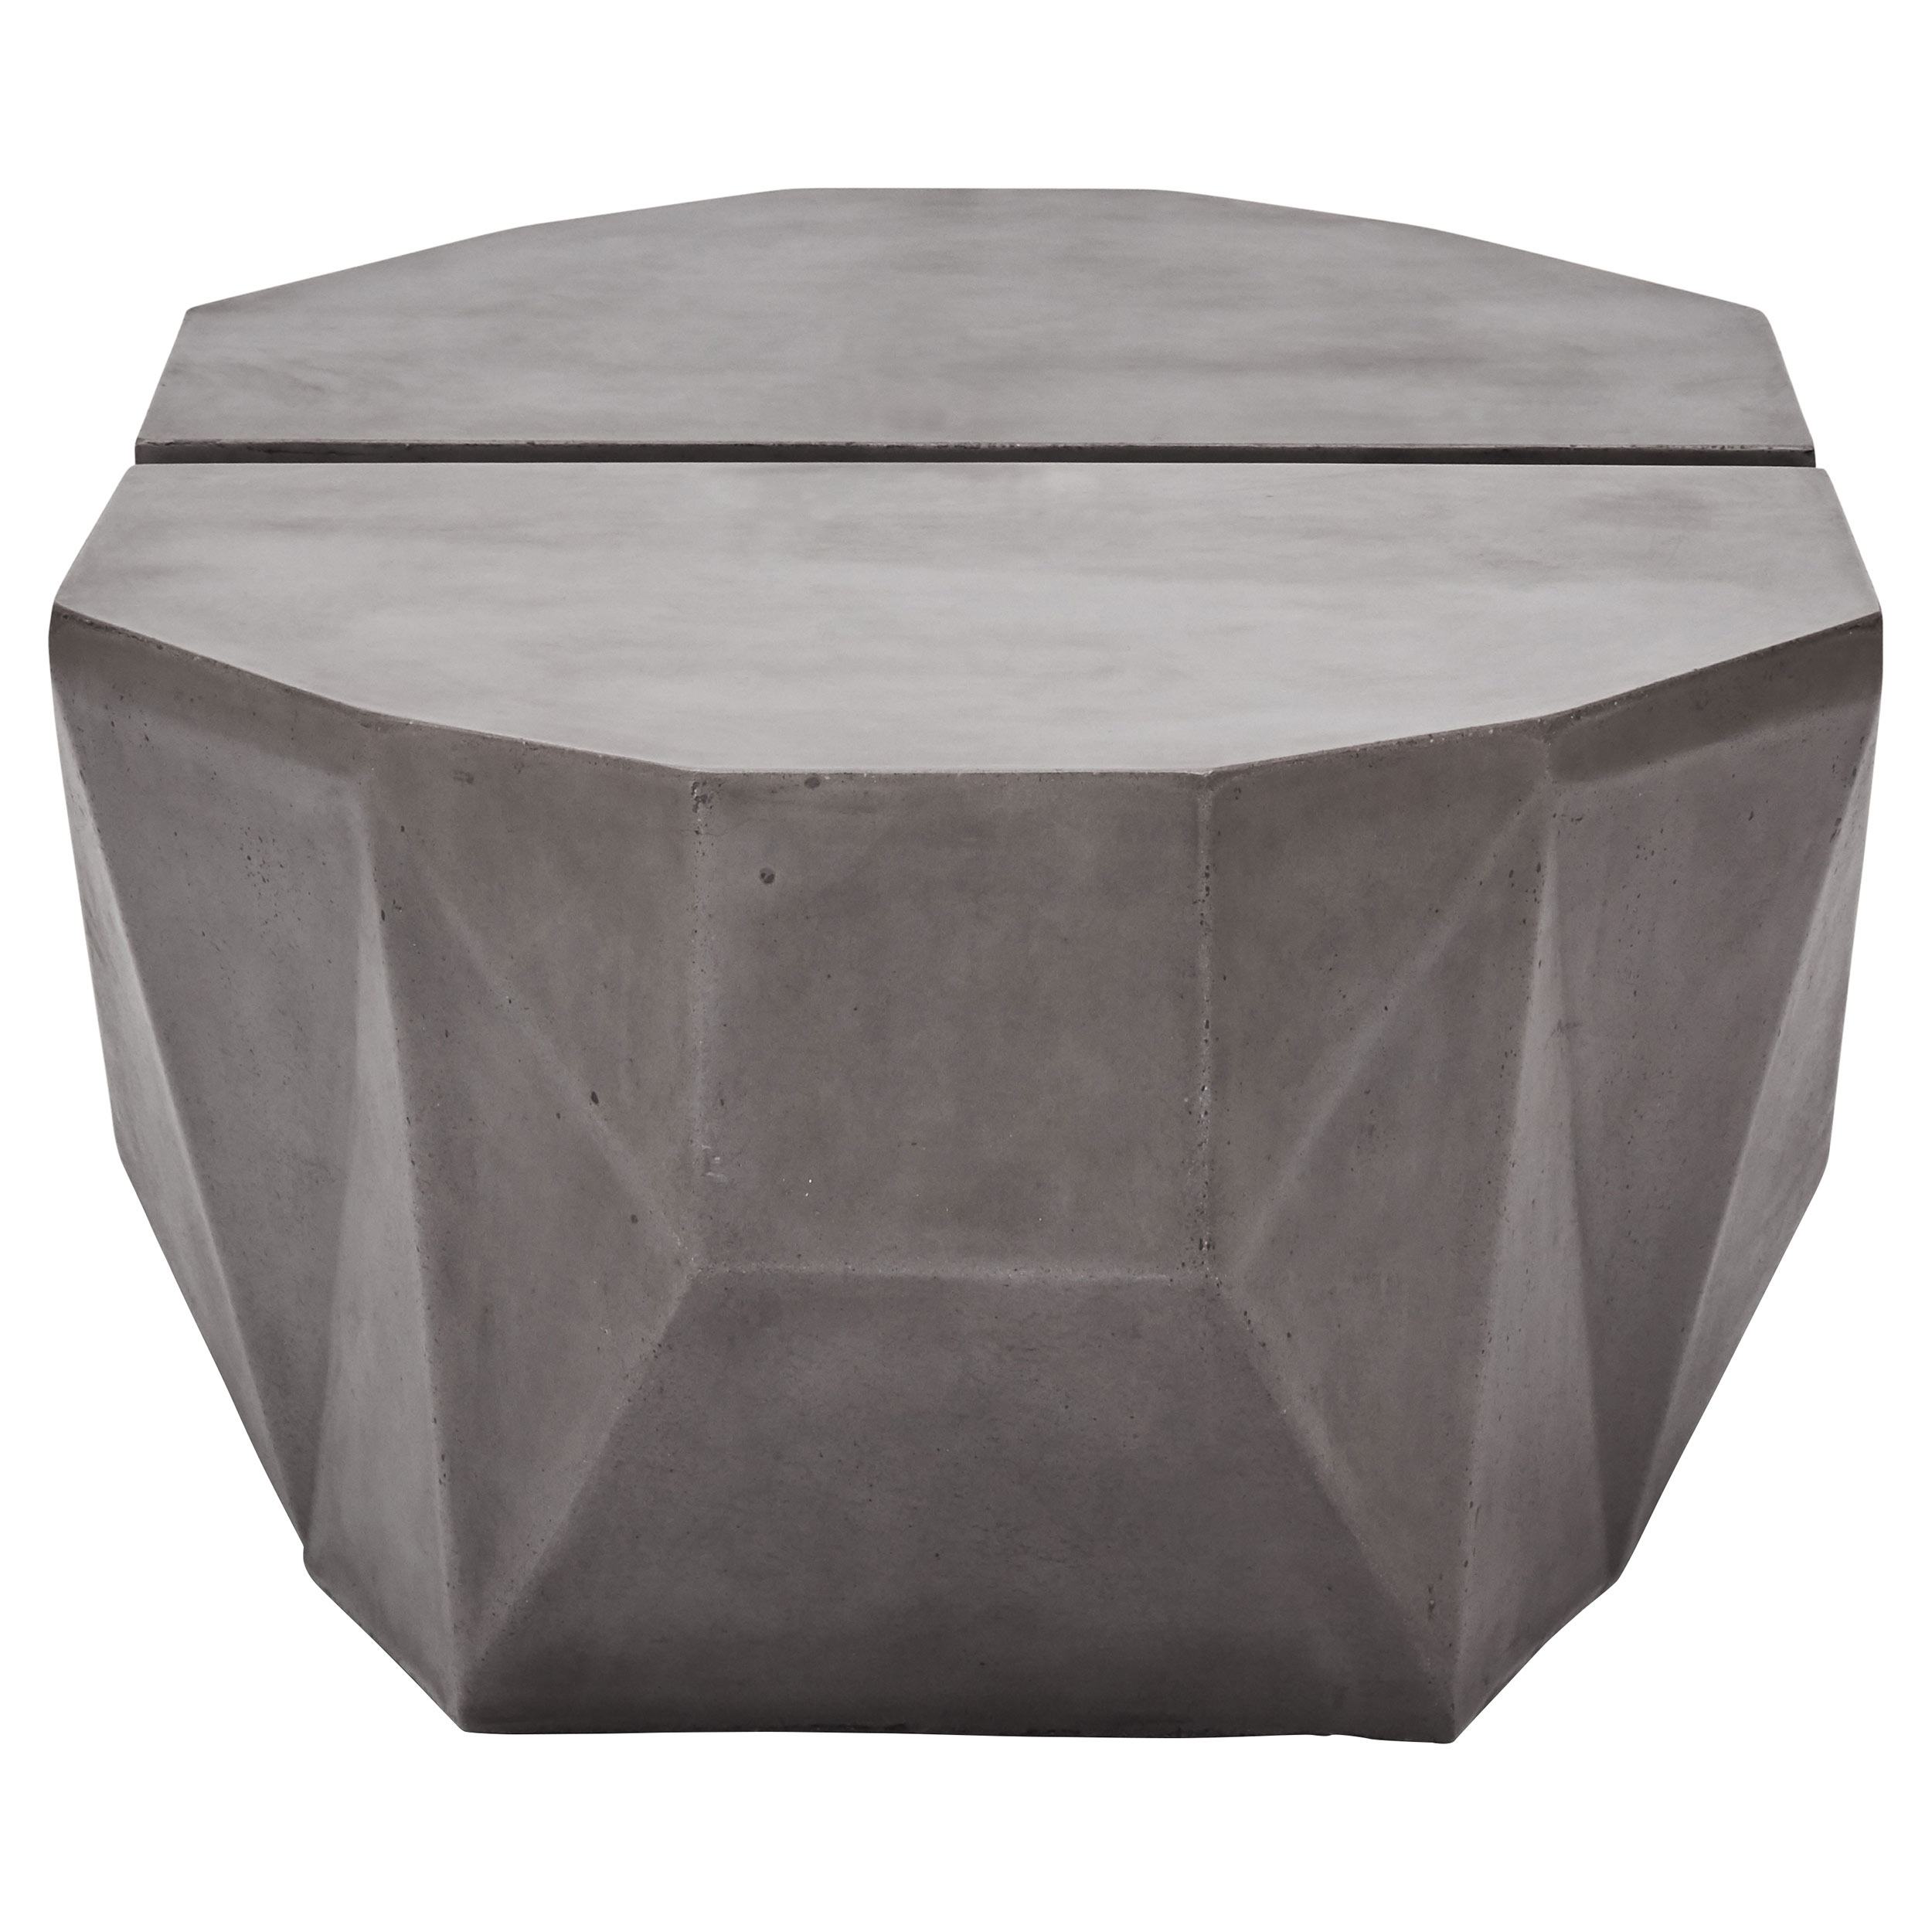 Lily Modern Classic Dark Grey Geometric Outdoor Coffee Table - Set of 2 - Image 6